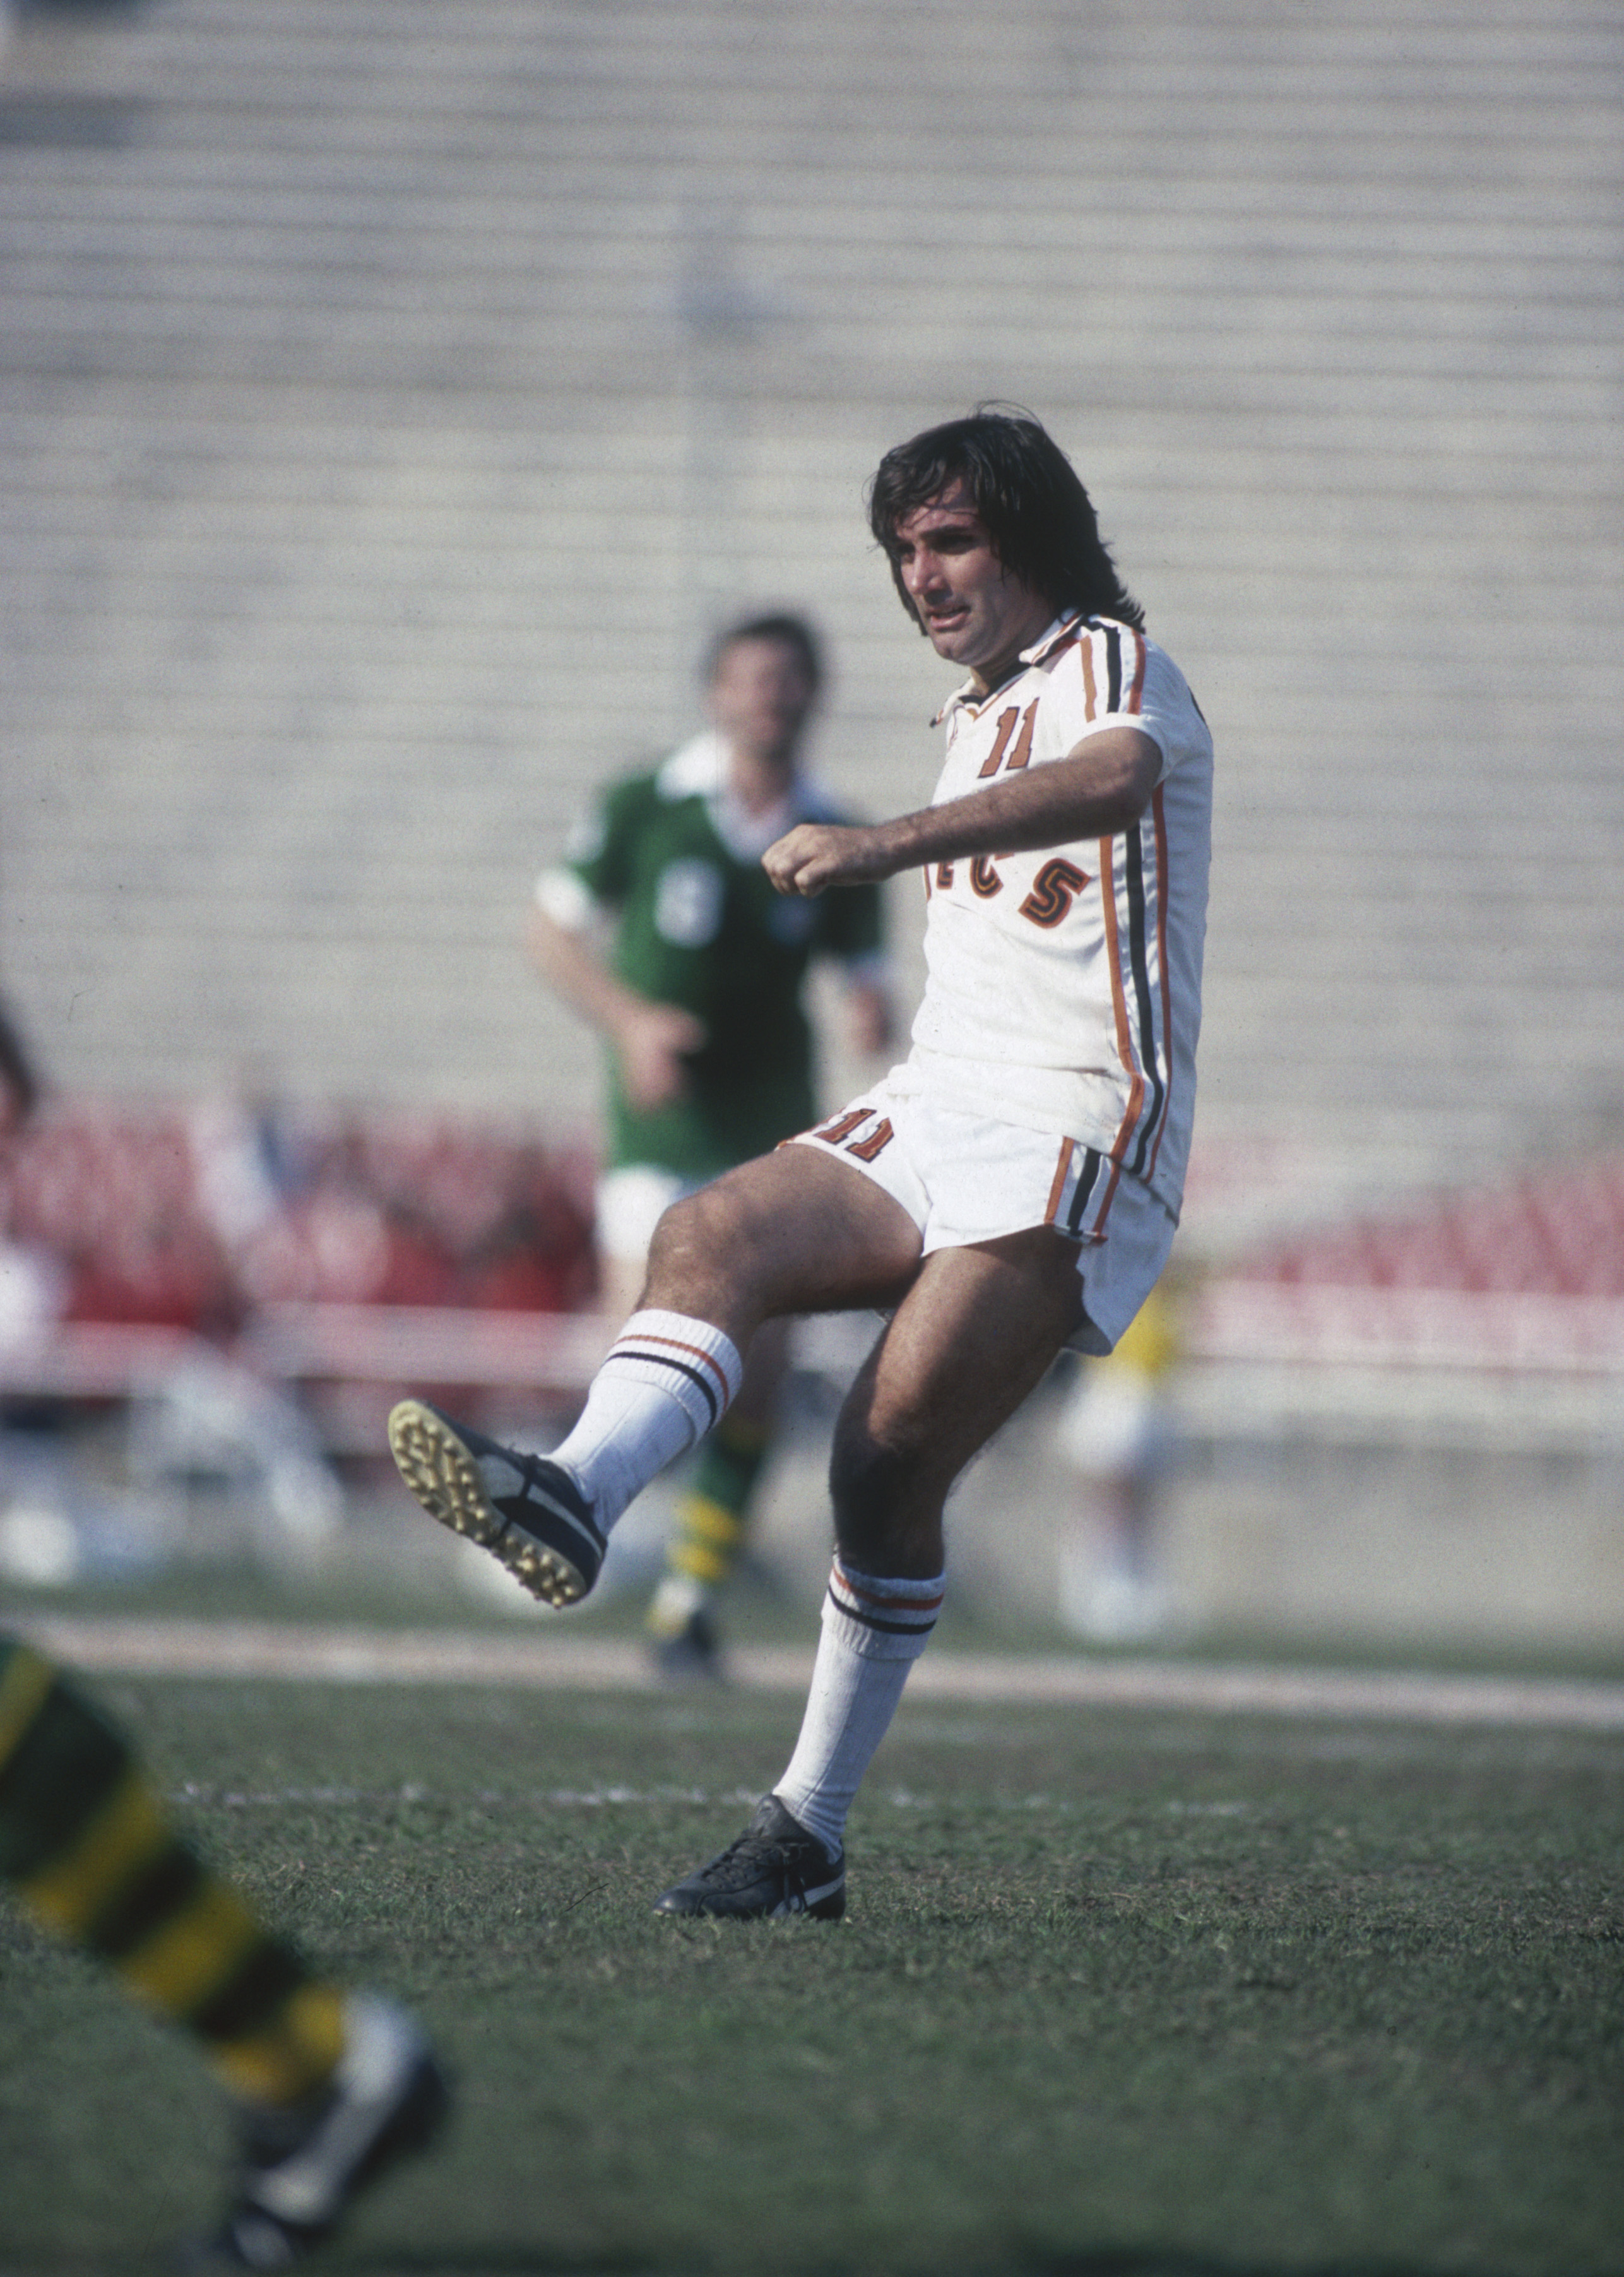 NEW YORK - 1978:  George Best of the LA Aztecs passes the ball during the NASL League match between the New York Cosmos and LA Aztecs held in 1978 in New York, USA. (Photo by Tony Duffy/Getty Images)